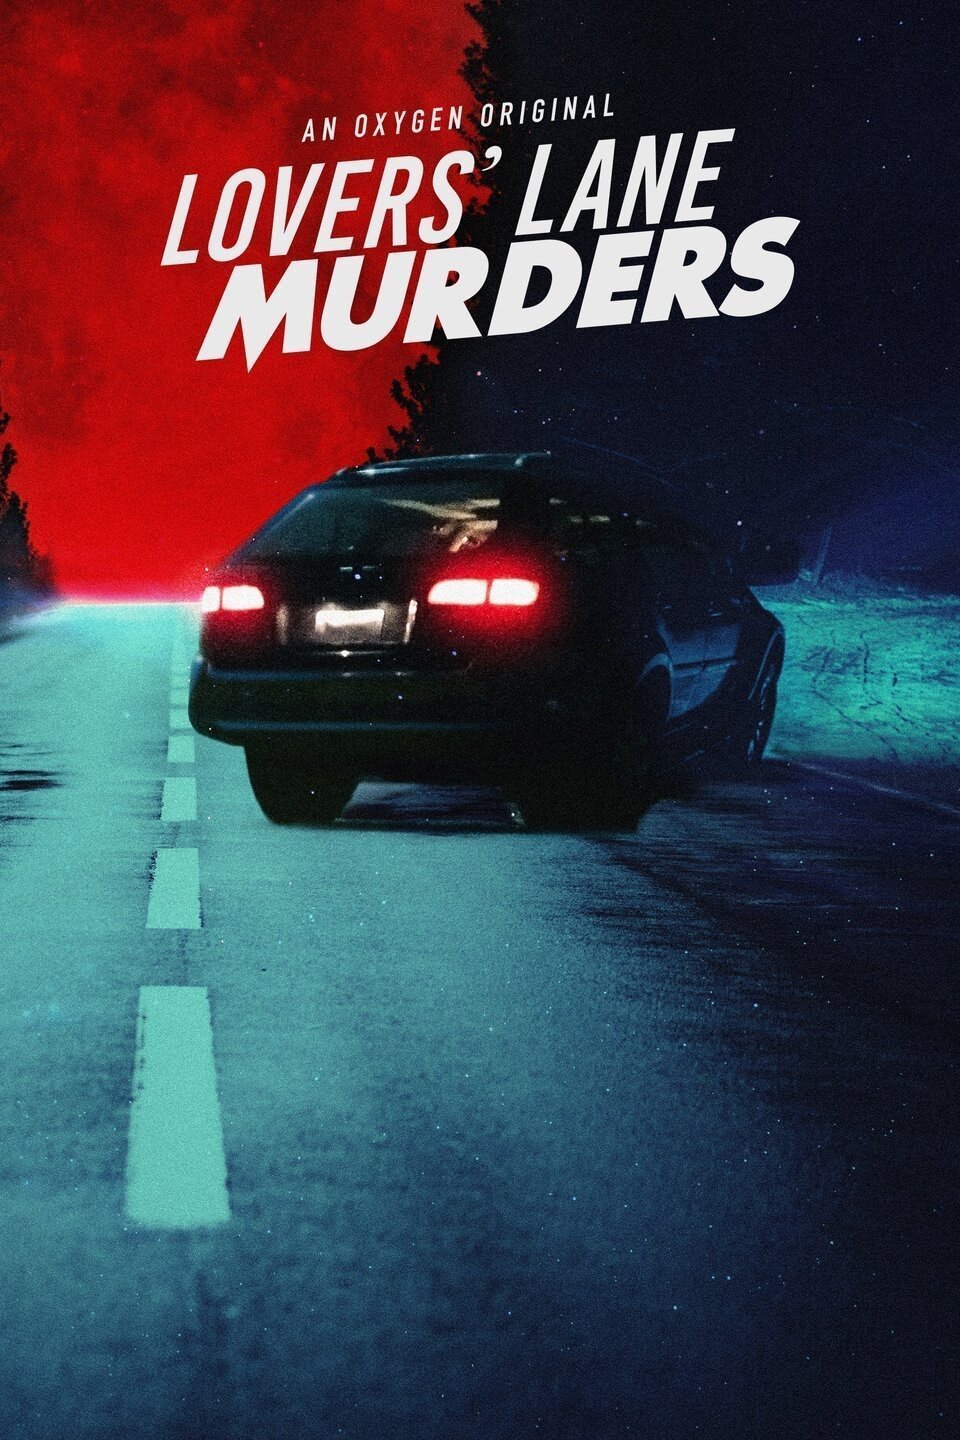 Poster of the movie Lovers' Lane Murders